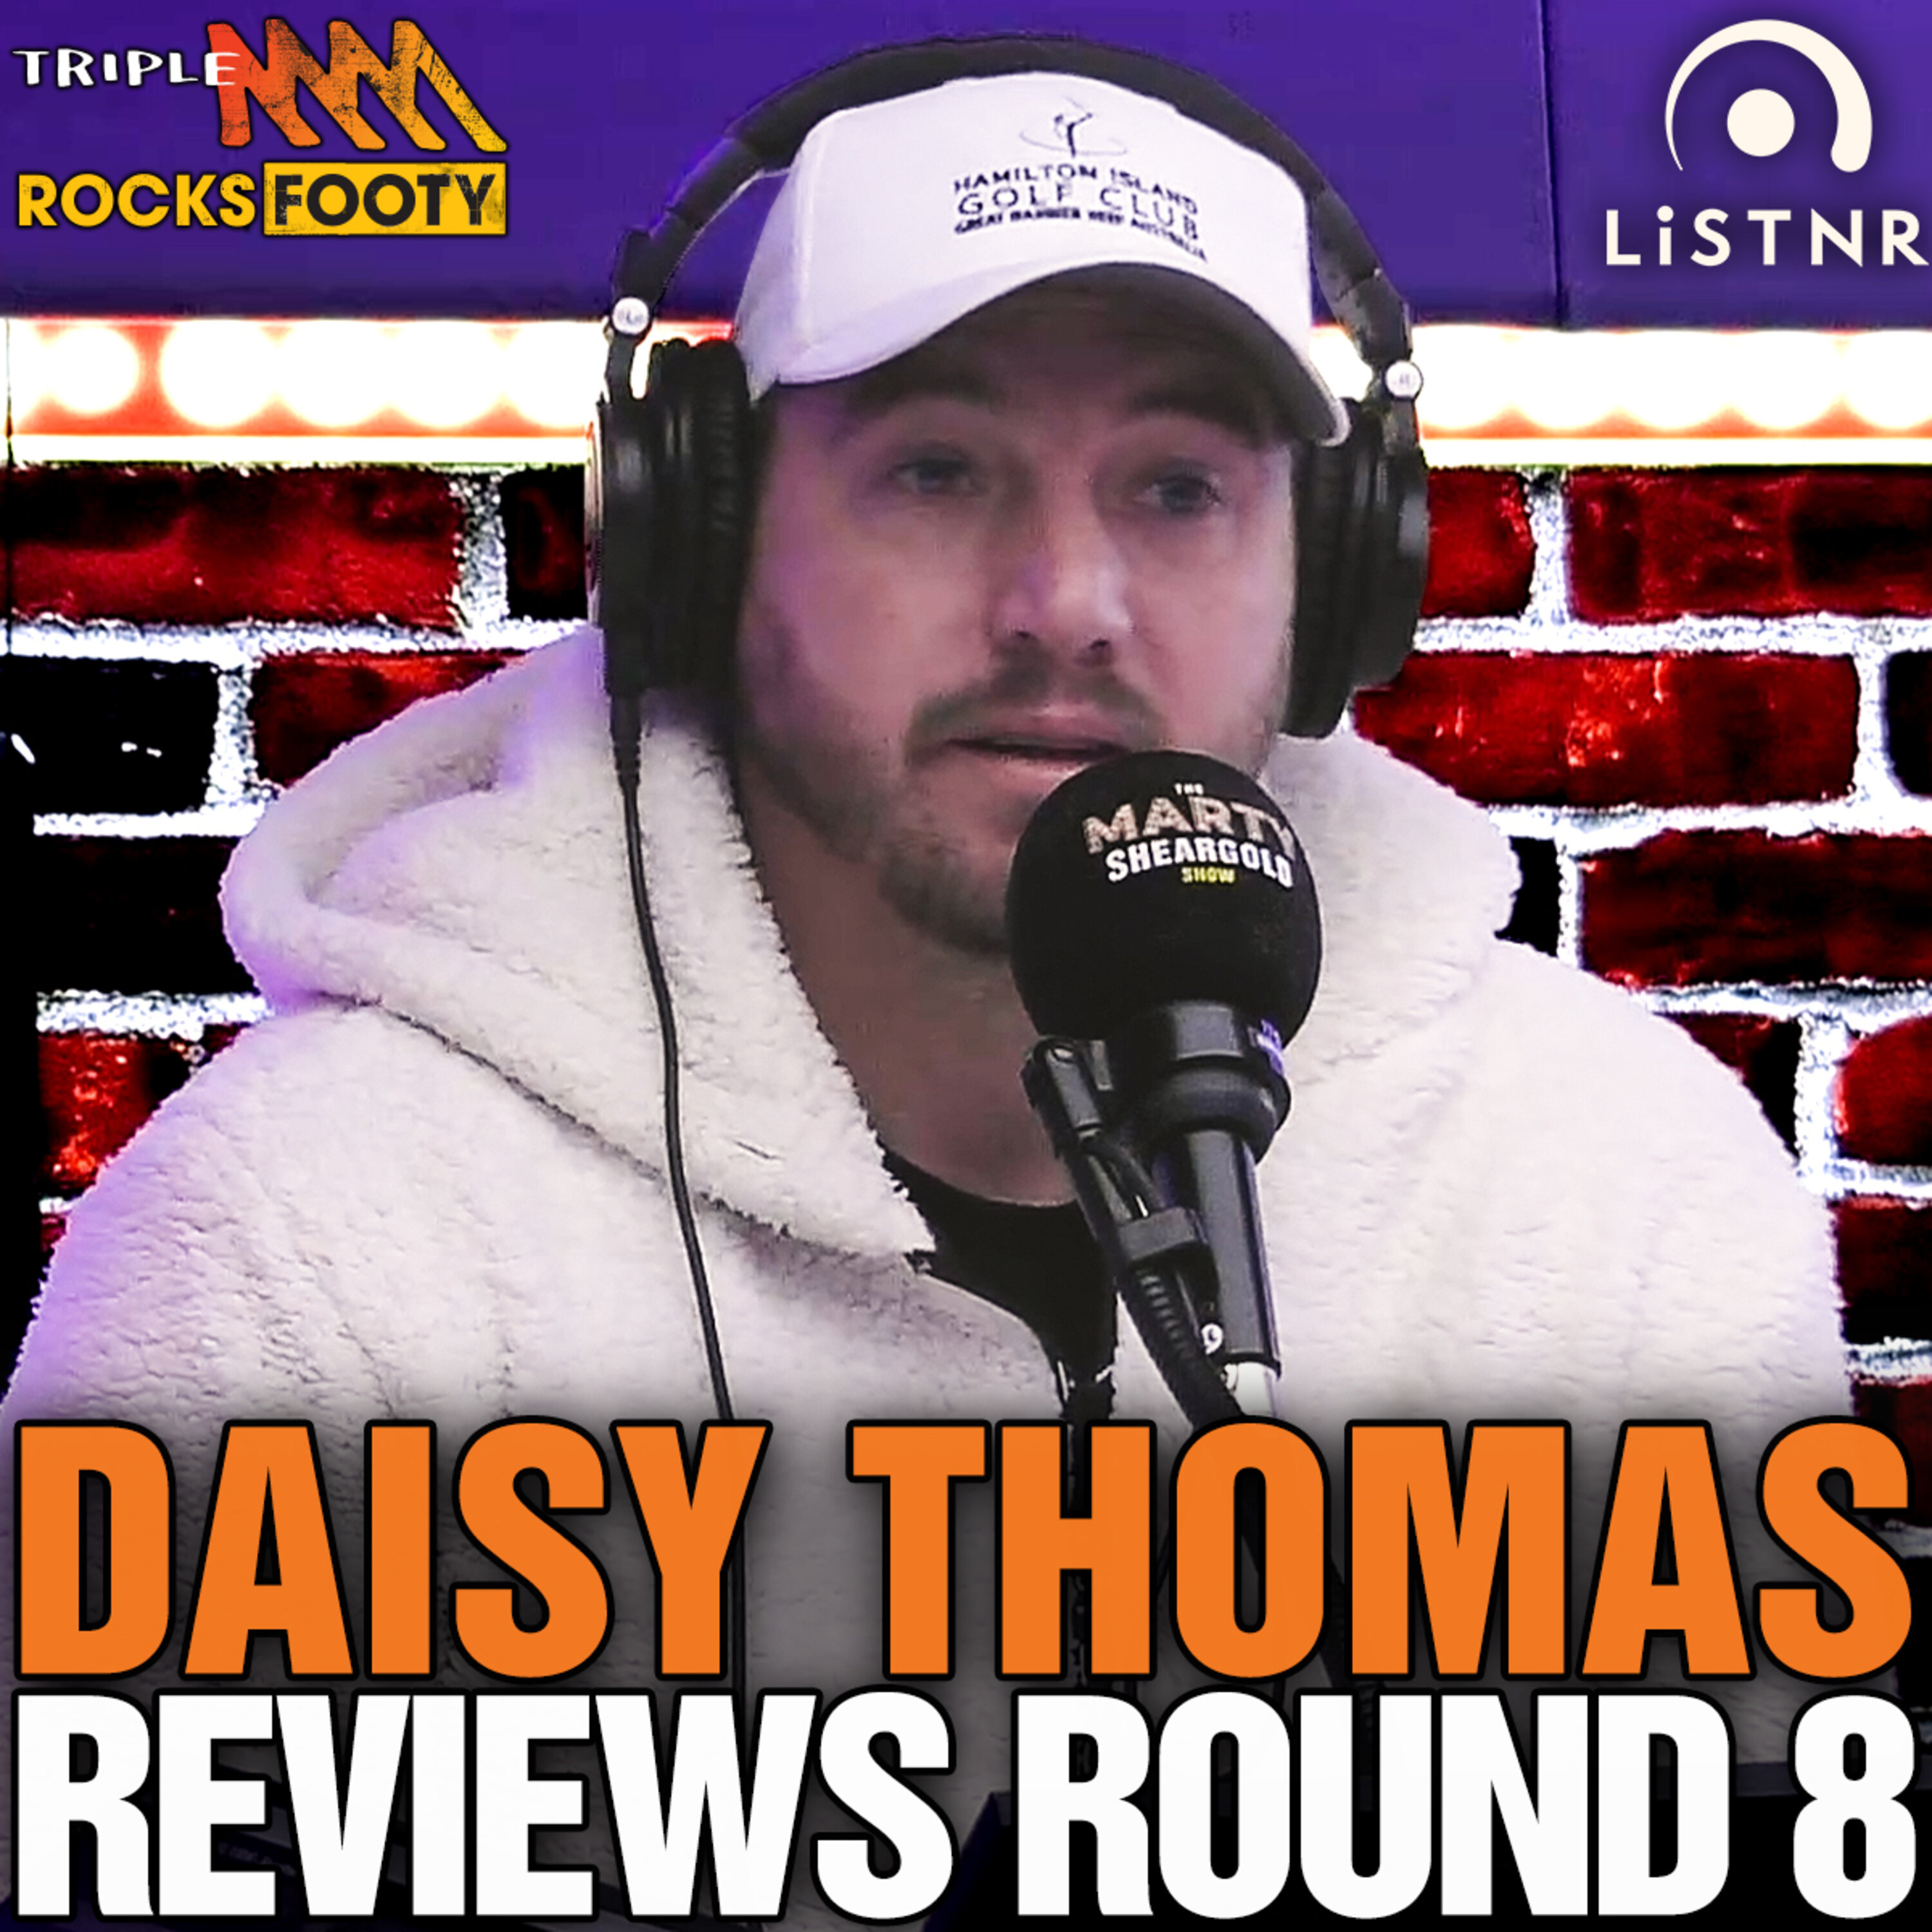 Daisy Thomas on the booing of Buddy Franklin, Kane Cornes' Tim Taranto comments, and a review of round 8